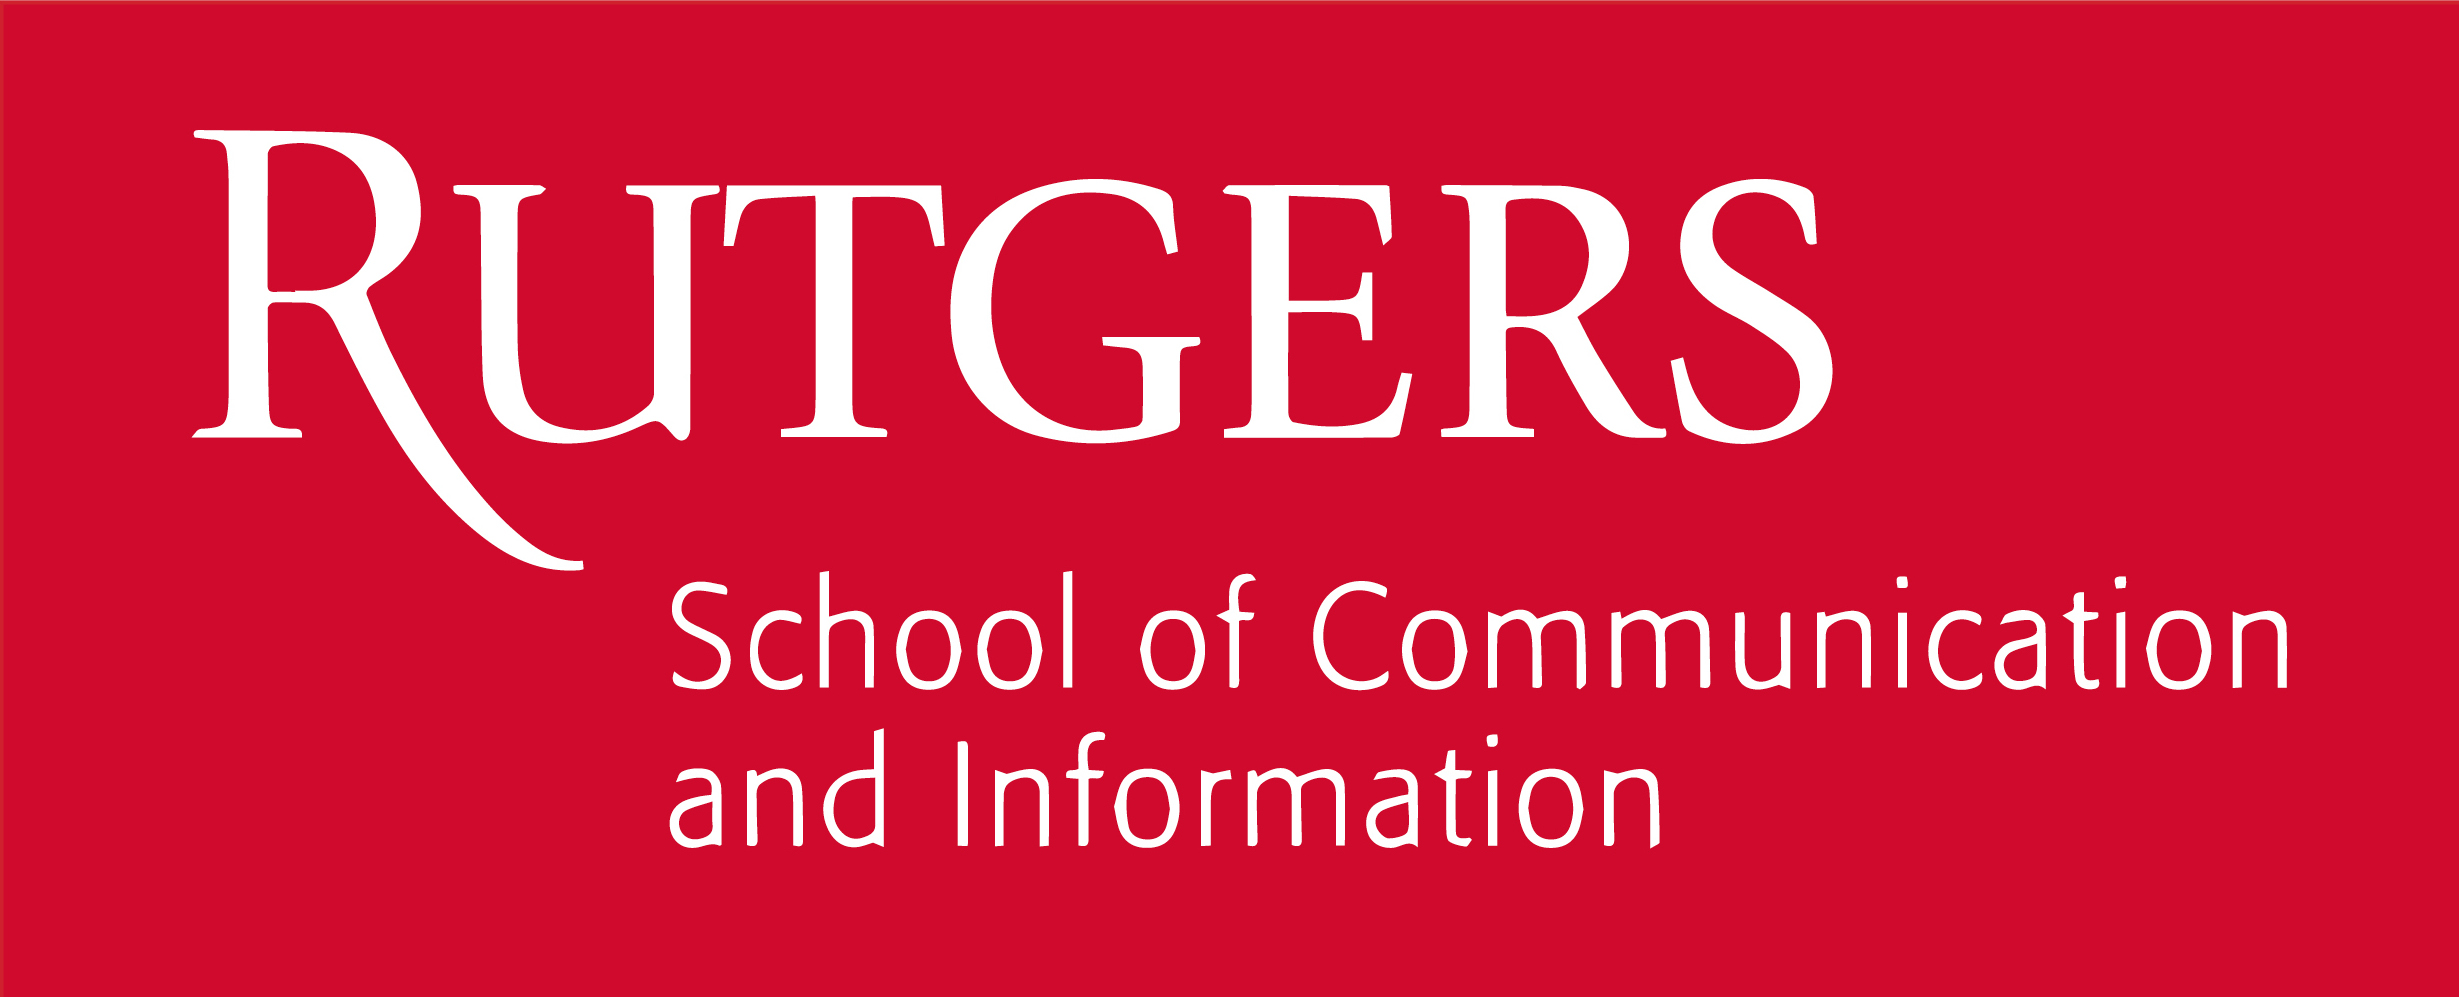 Rutgers University School of Communication and Information